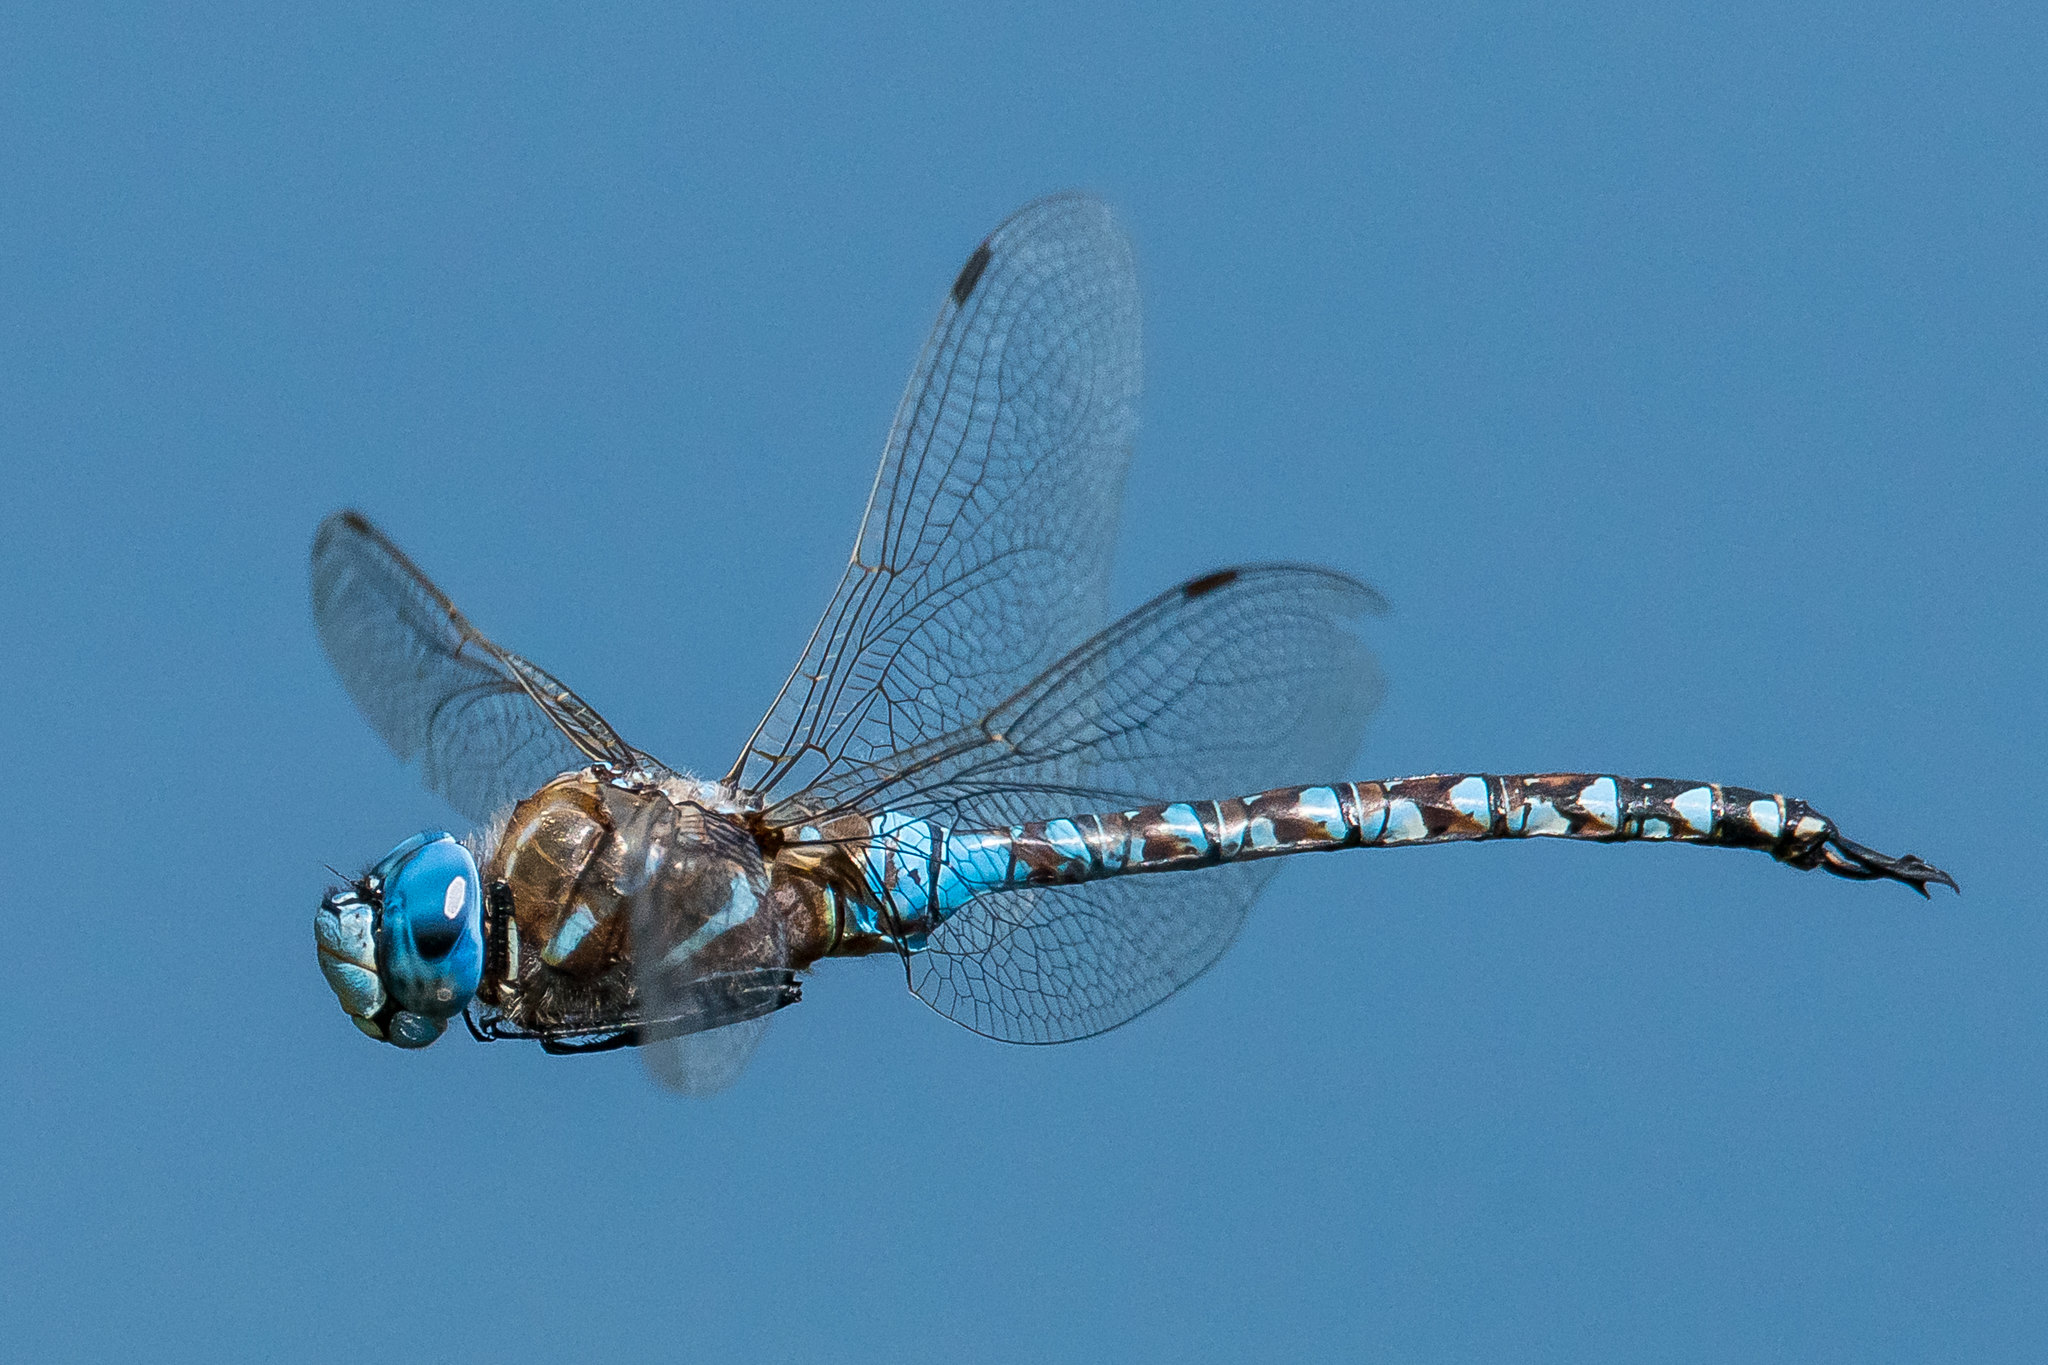 Dragonfly Hovers over Pond